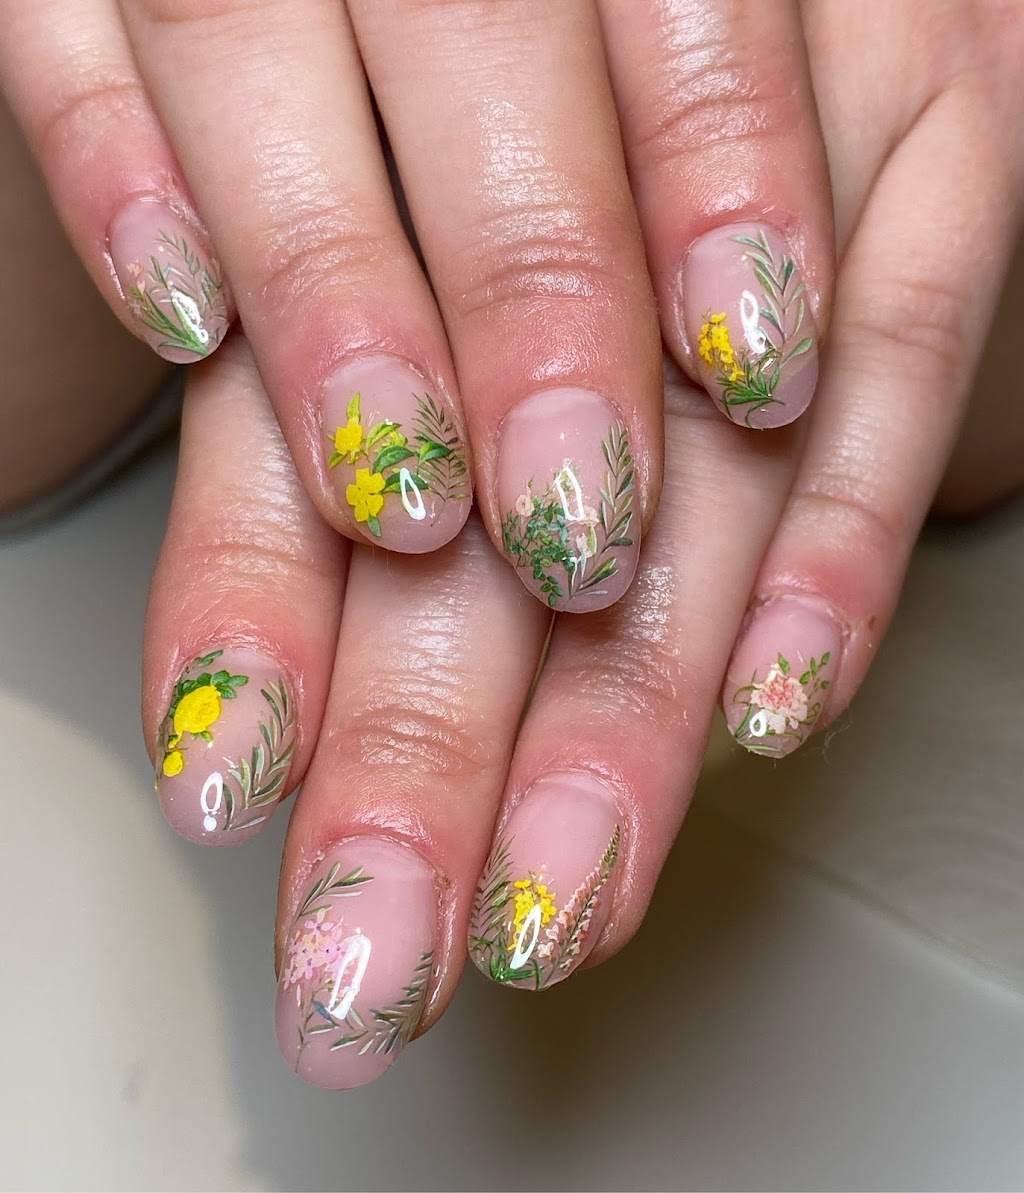 Nails with Lo | 41340 Government Rd, Brackendale, BC V0N 1H0, Canada | Phone: (604) 849-1682